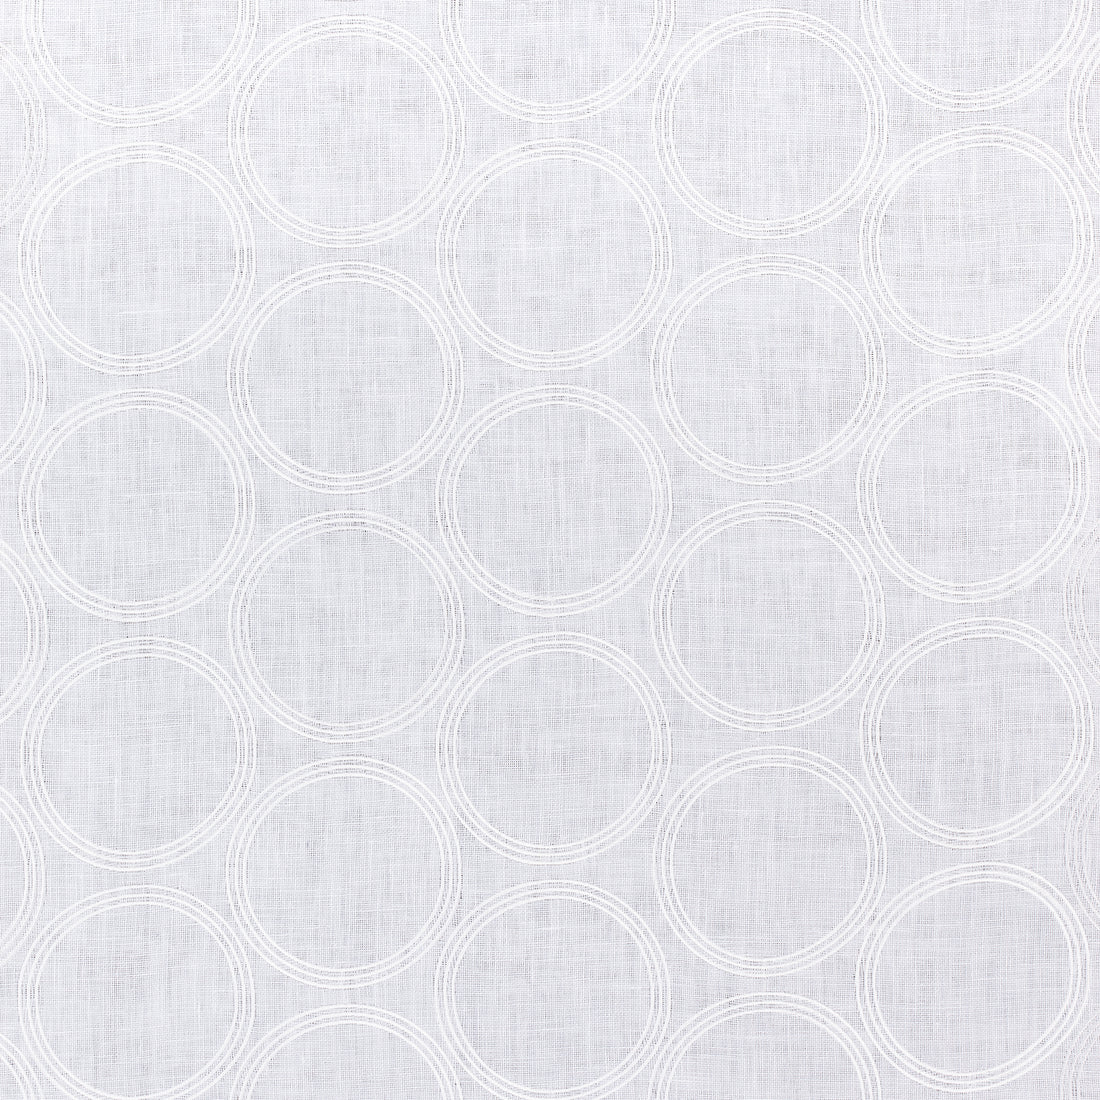 Marbella Circle Embroidery fabric in white color - pattern number AW9120 - by Anna French in the Natural Glimmer collection